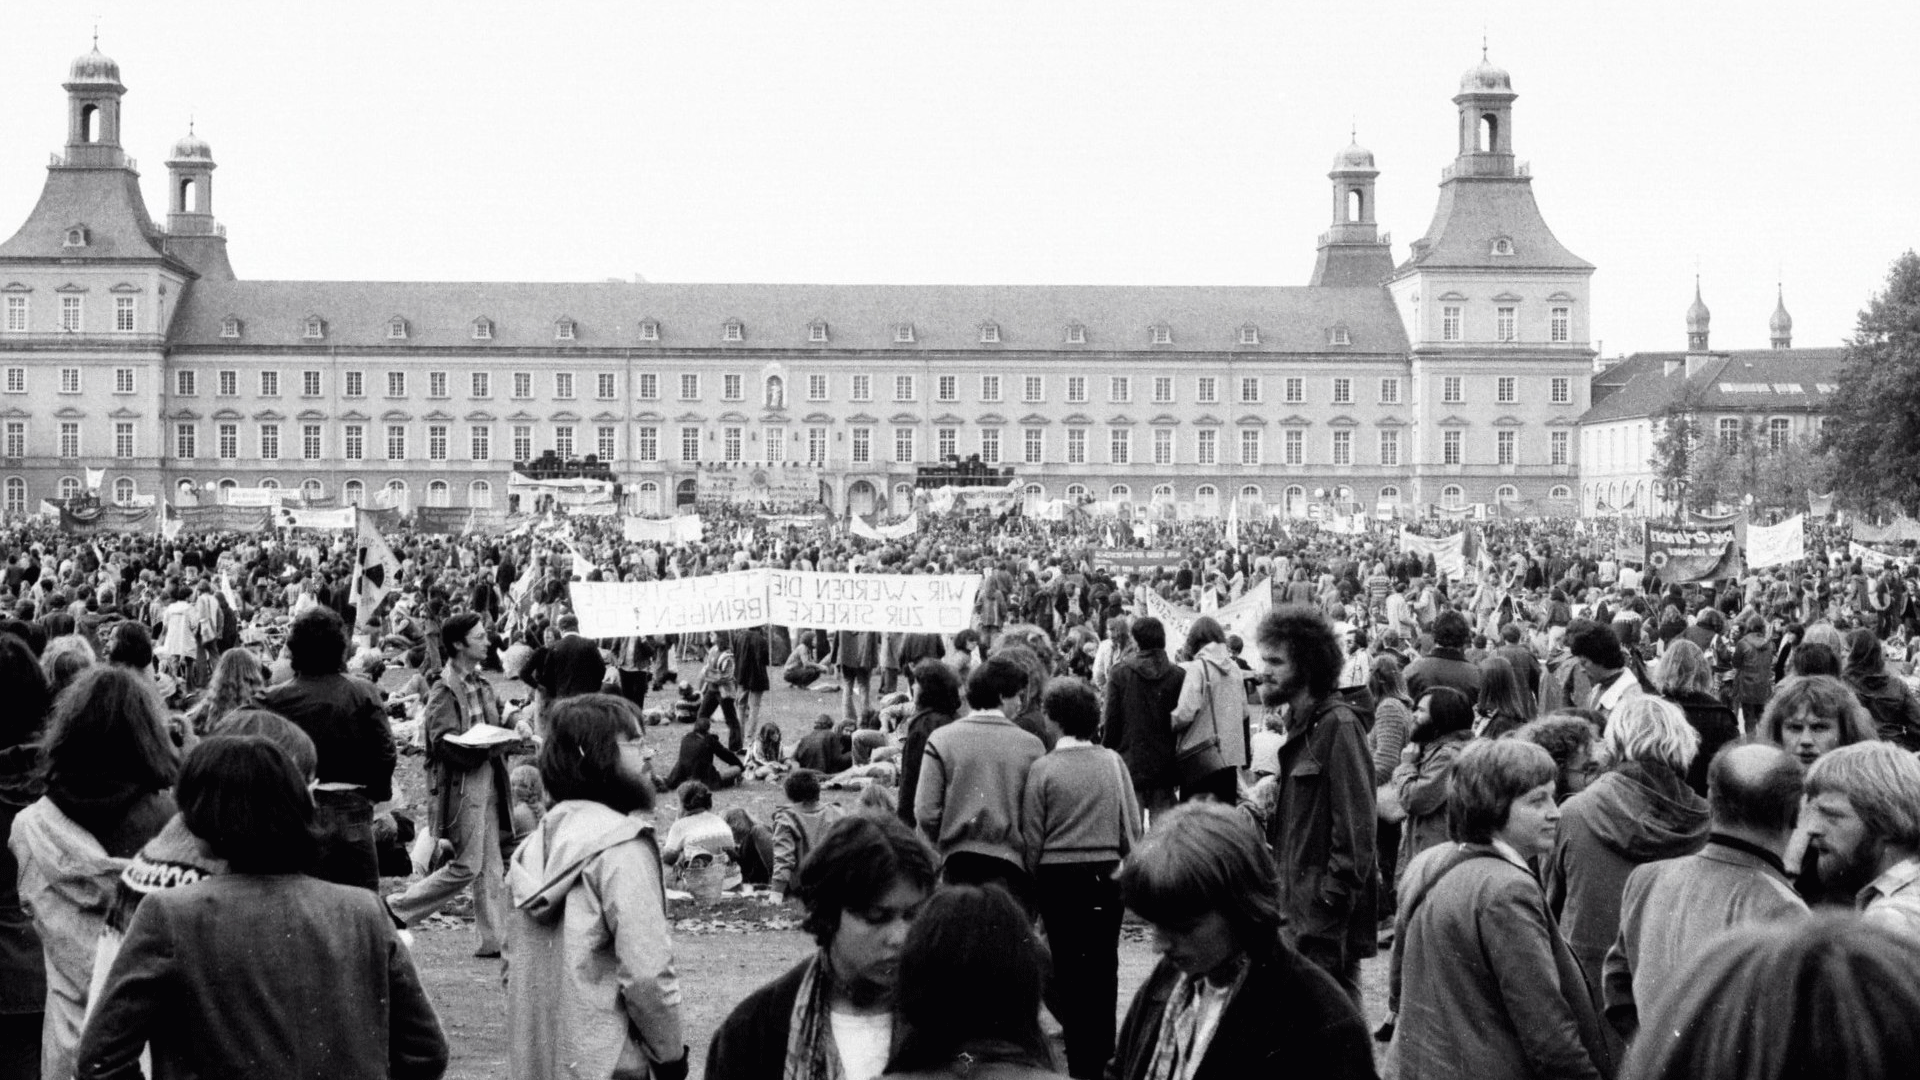 About 100,000 peolpe protest against the use of nuclear power in Bonn, capital city of West Germany.